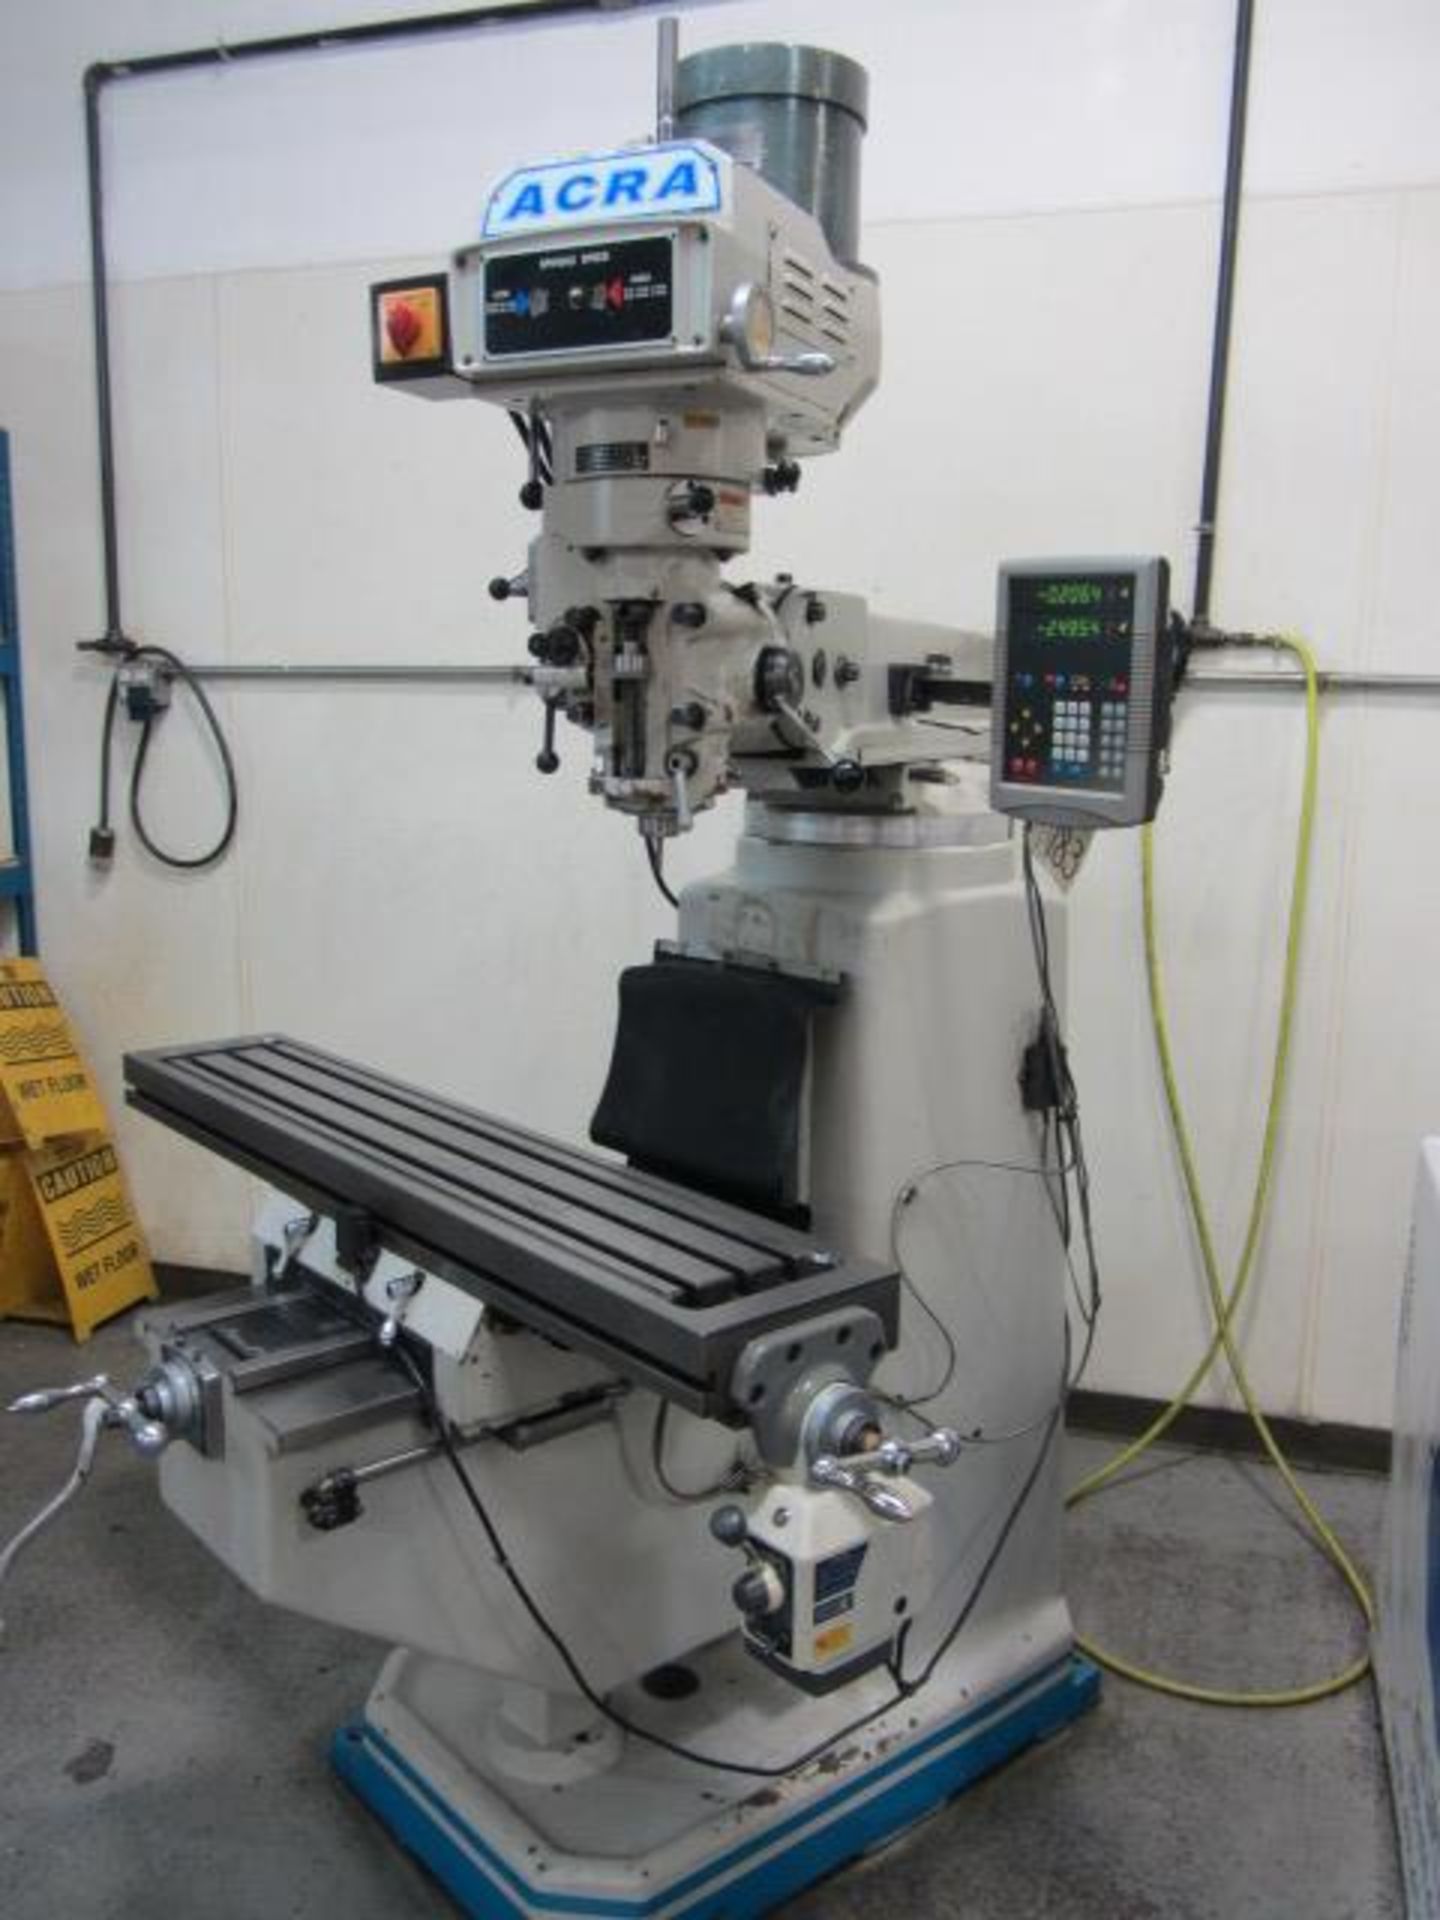 Acra Model AM-3V Variable Speed Vertical Milling Machine with 10'' x 54'' Power Feed Table, R-8 - Image 3 of 9